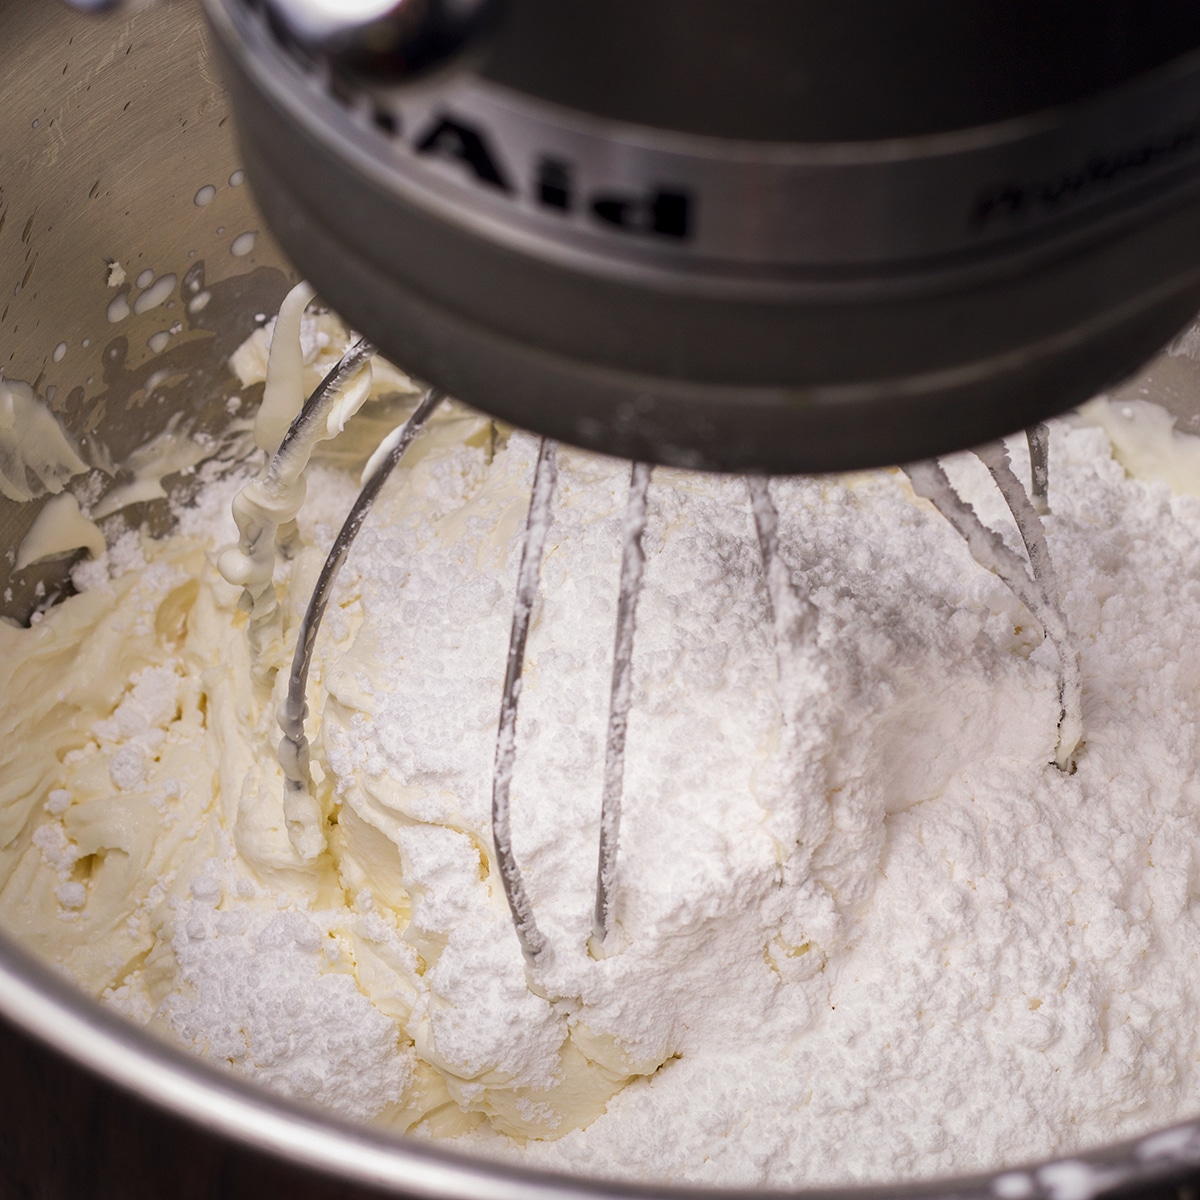 Using an electric mixer to beat powdered sugar into mascarpone frosting.